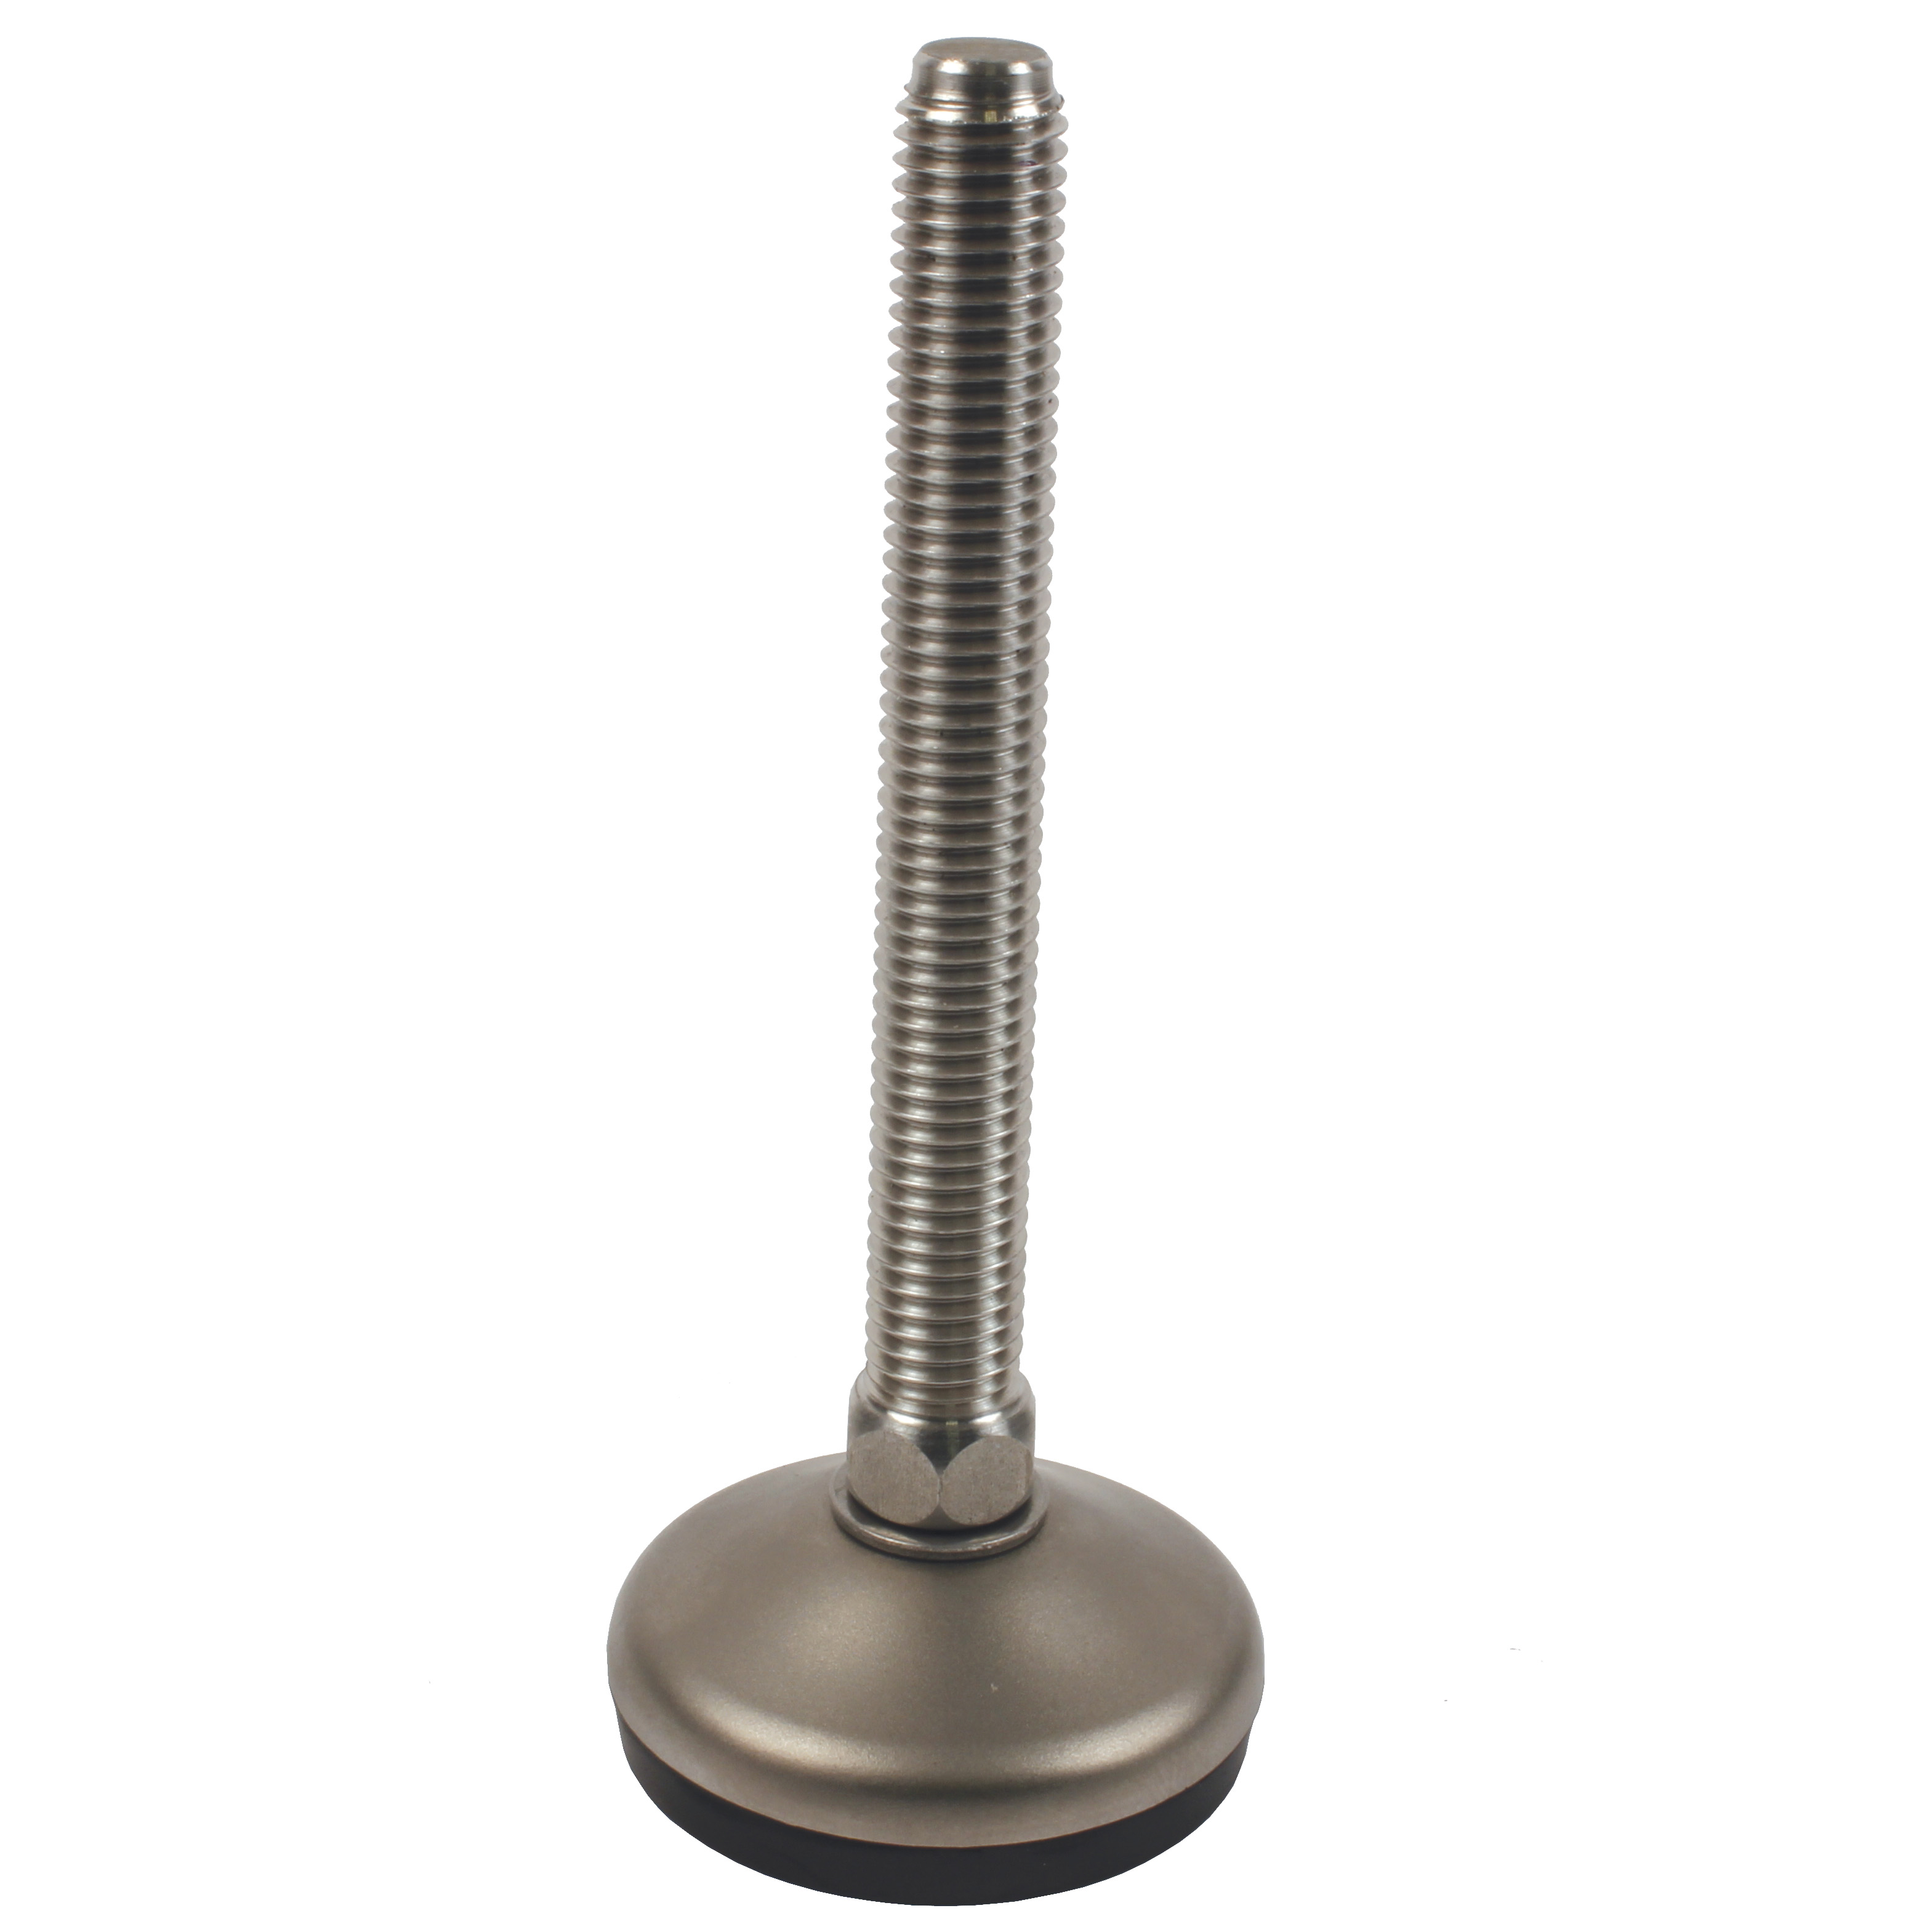 Articulated levelling foot, pressed base Ø100 - Ø 100 - Stainless steel - sanded finish - 